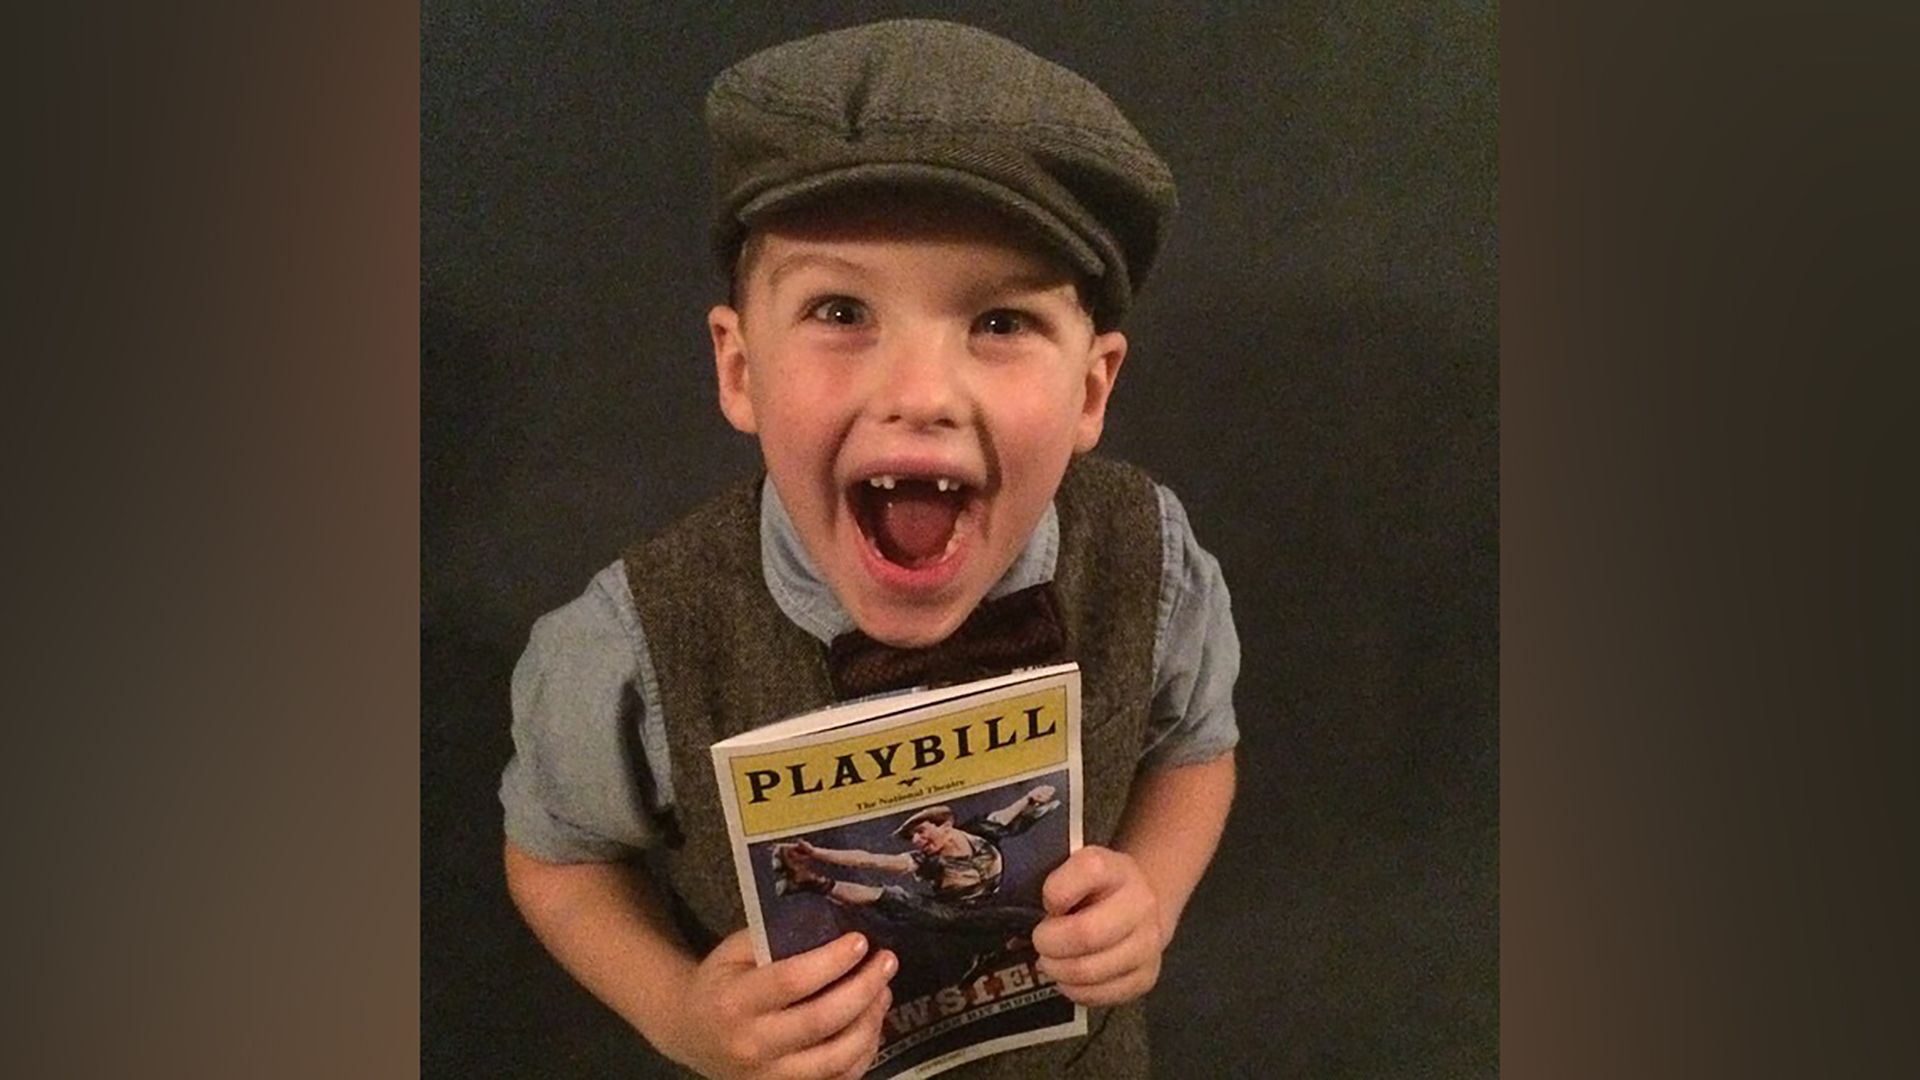 Young Iain Armitage with a theater program